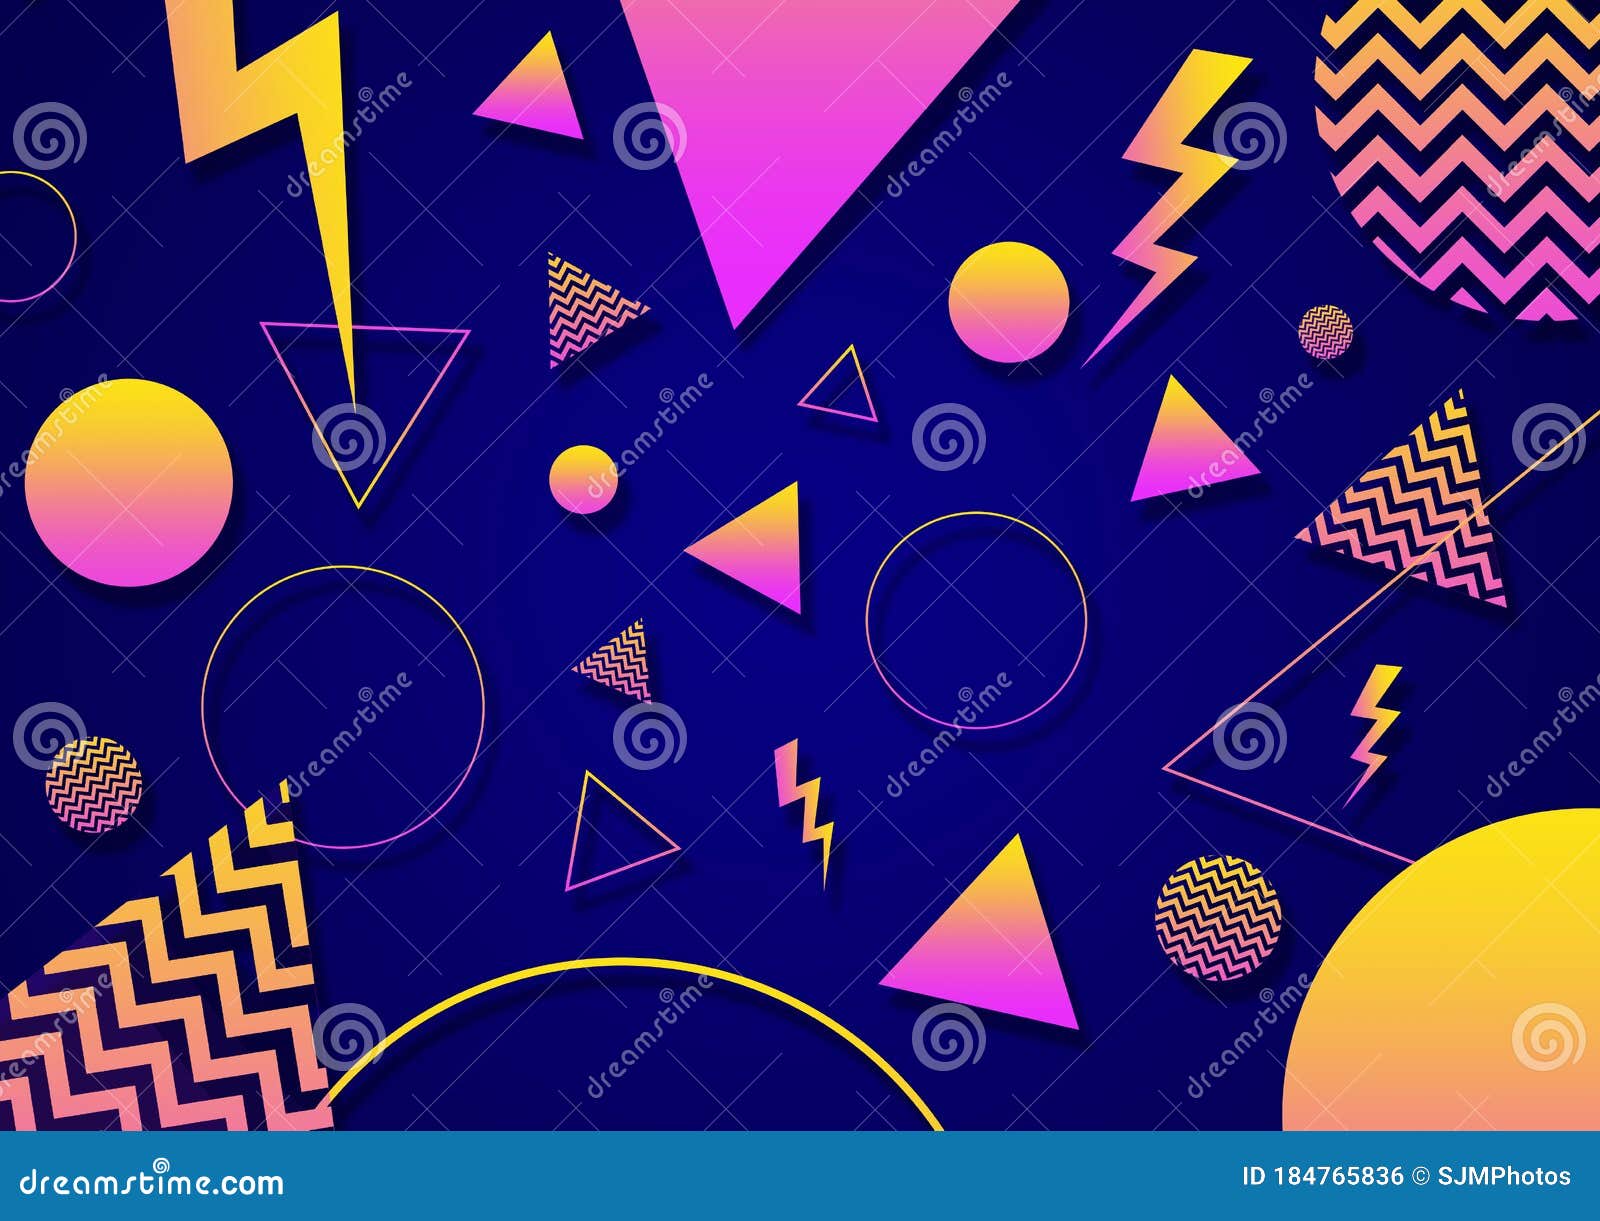 A Blue Pink And Yellow Retro Vaporwave 90 S Style Random Geometric Shapes With Vibrant Neon Color Palette On A Radial Gradient Stock Illustration Illustration Of Neon Hipster